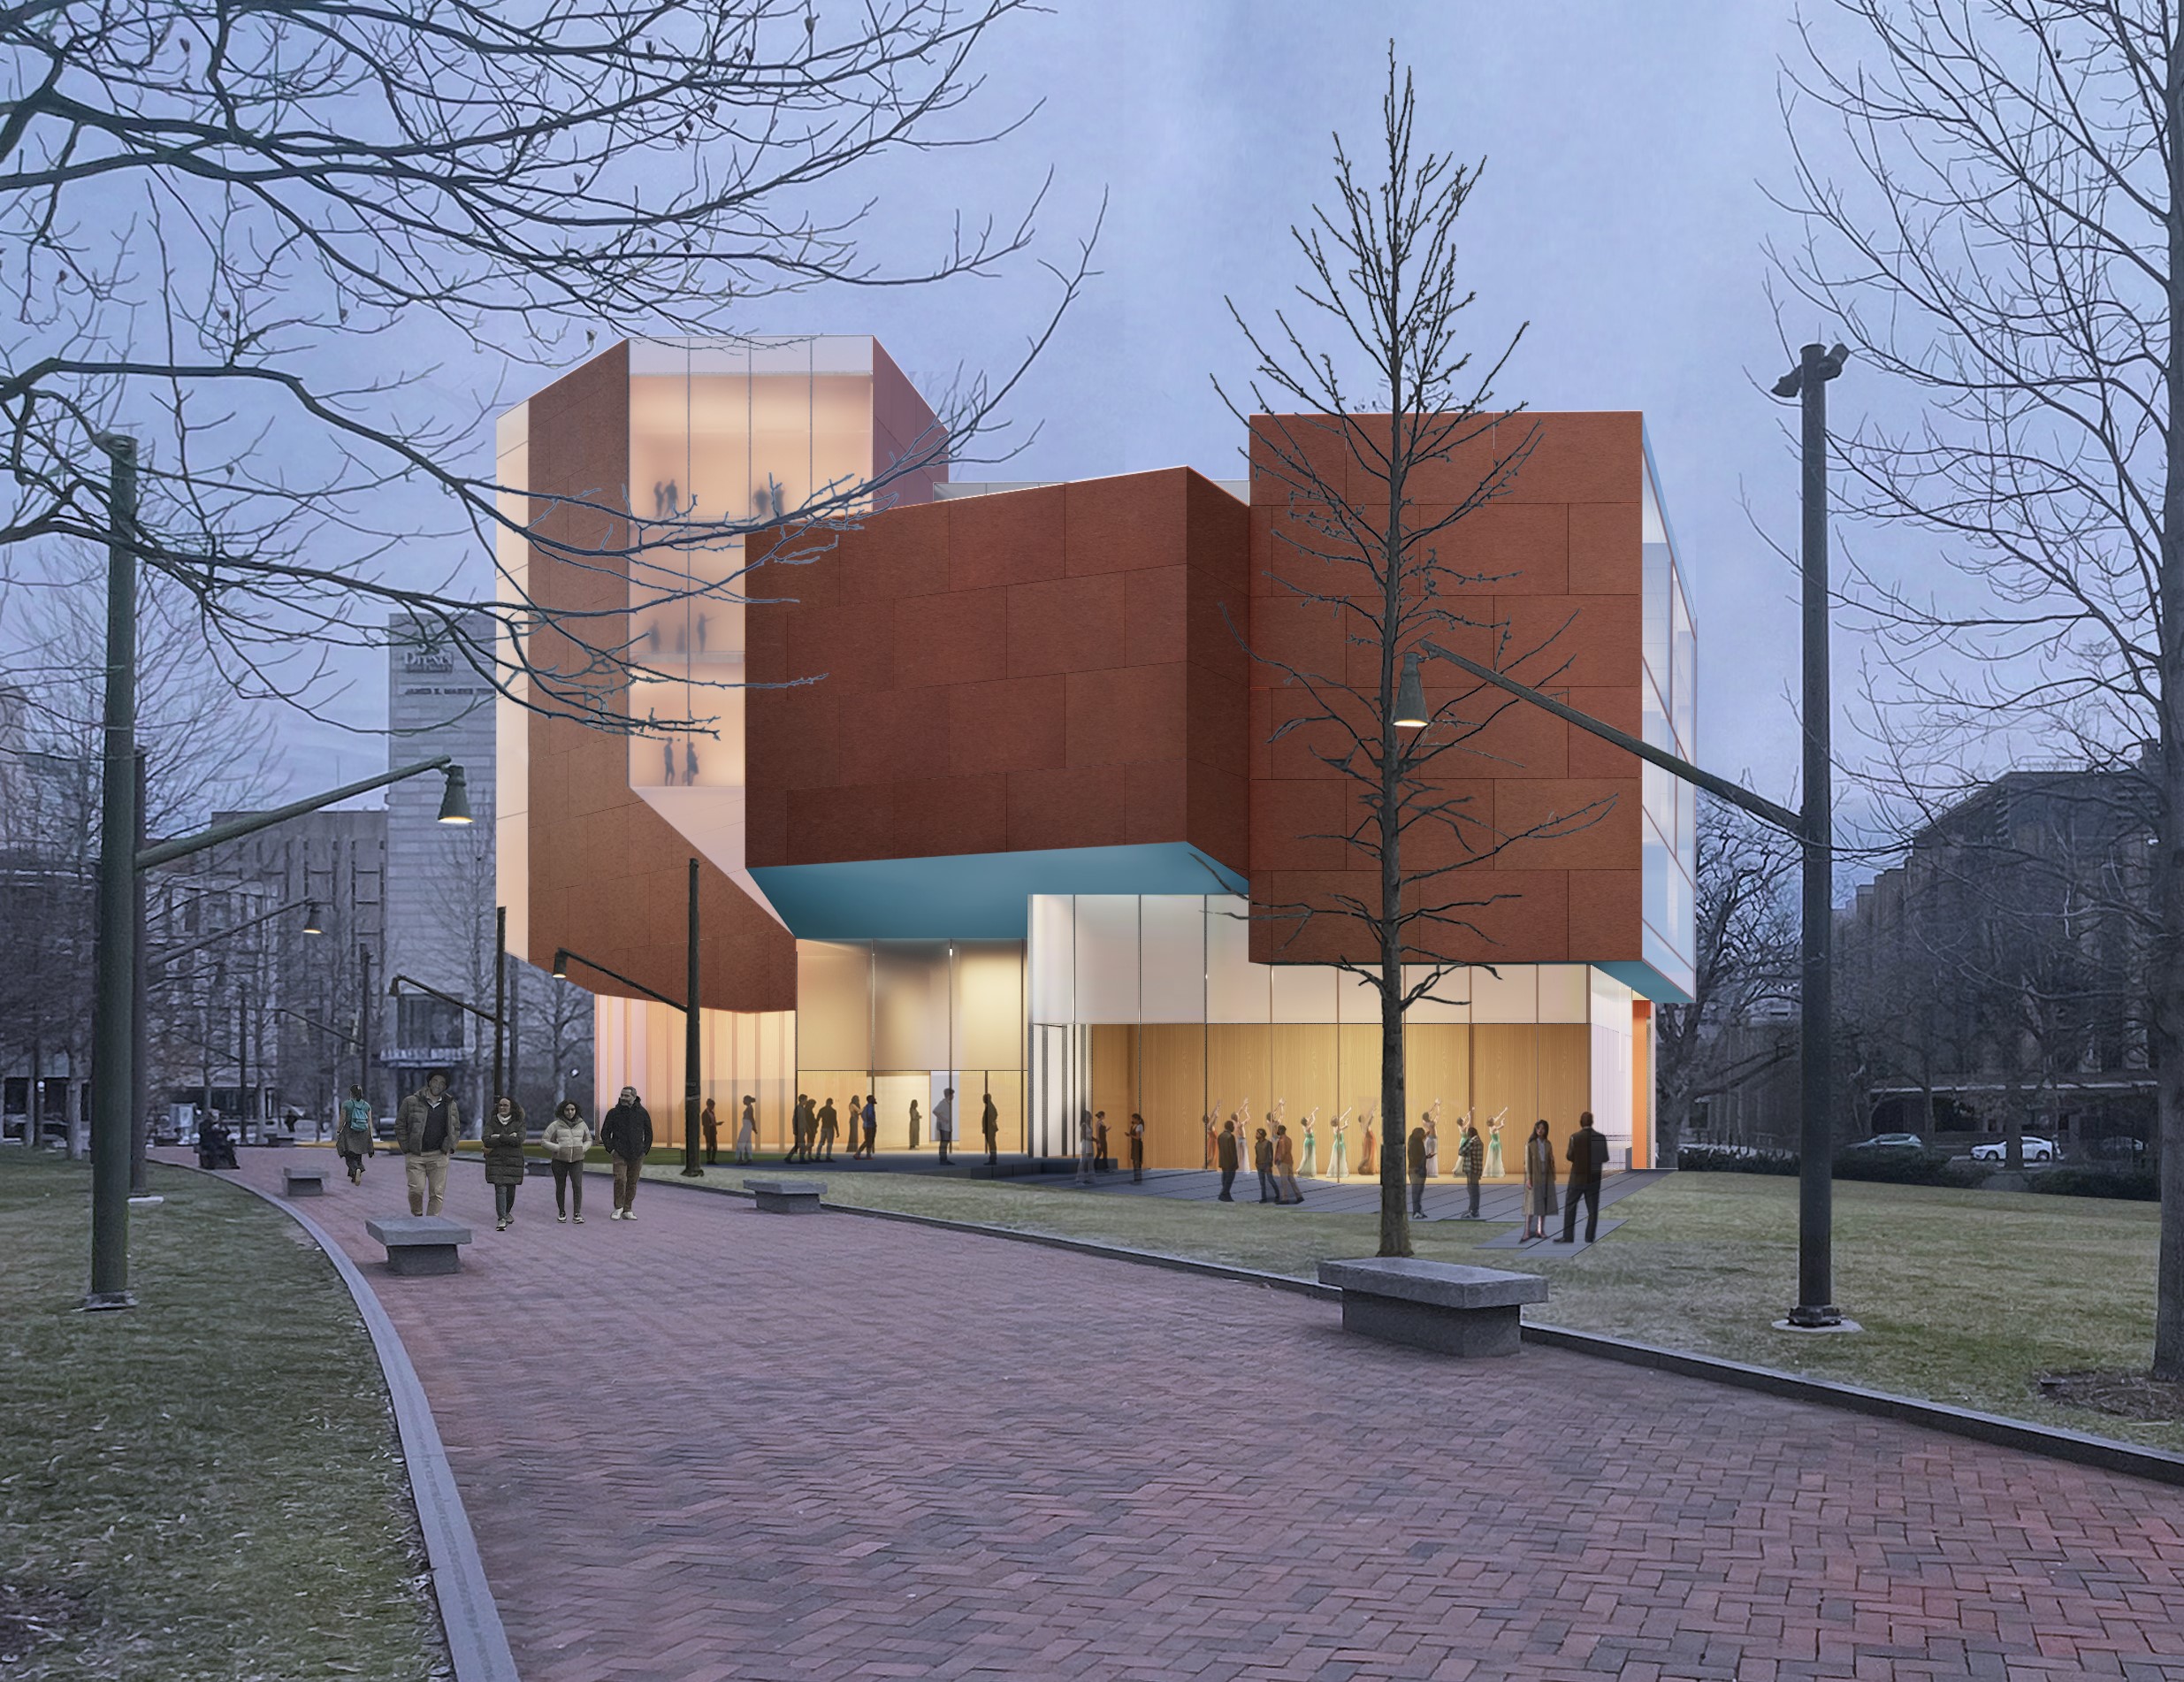 An architects rendering of the new Student Performing Arts Center at the University of Pennsylvania.